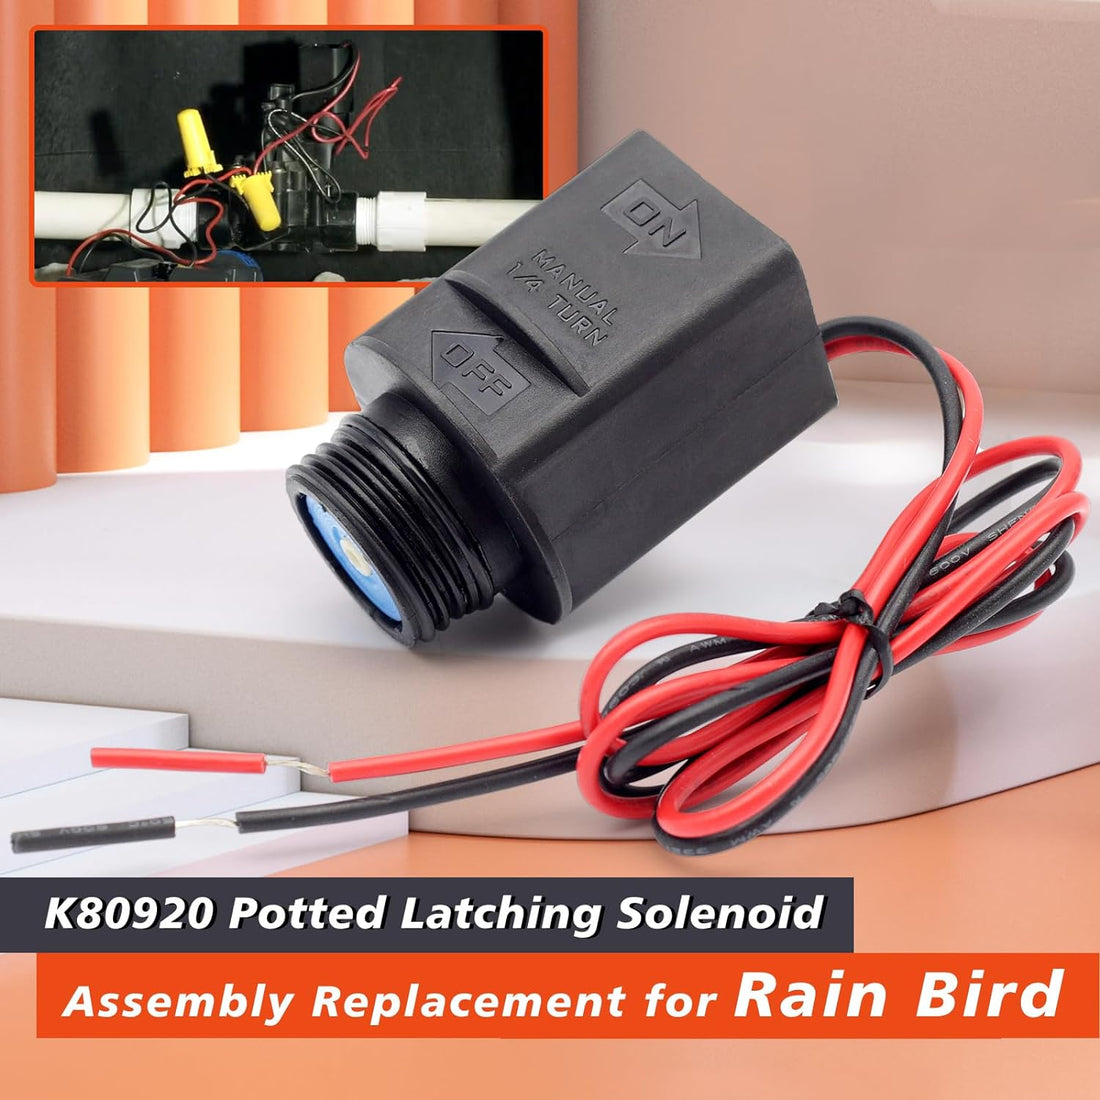 K80920 Potted Latching Solenoid Assembly Replacement for Rain Bird TBOSPSOL TBOS DV DVF ASVF PGA PEB PESB GB EFB-CP BPE and BPES Series Irrigation Sprinkler System DC Solenoid